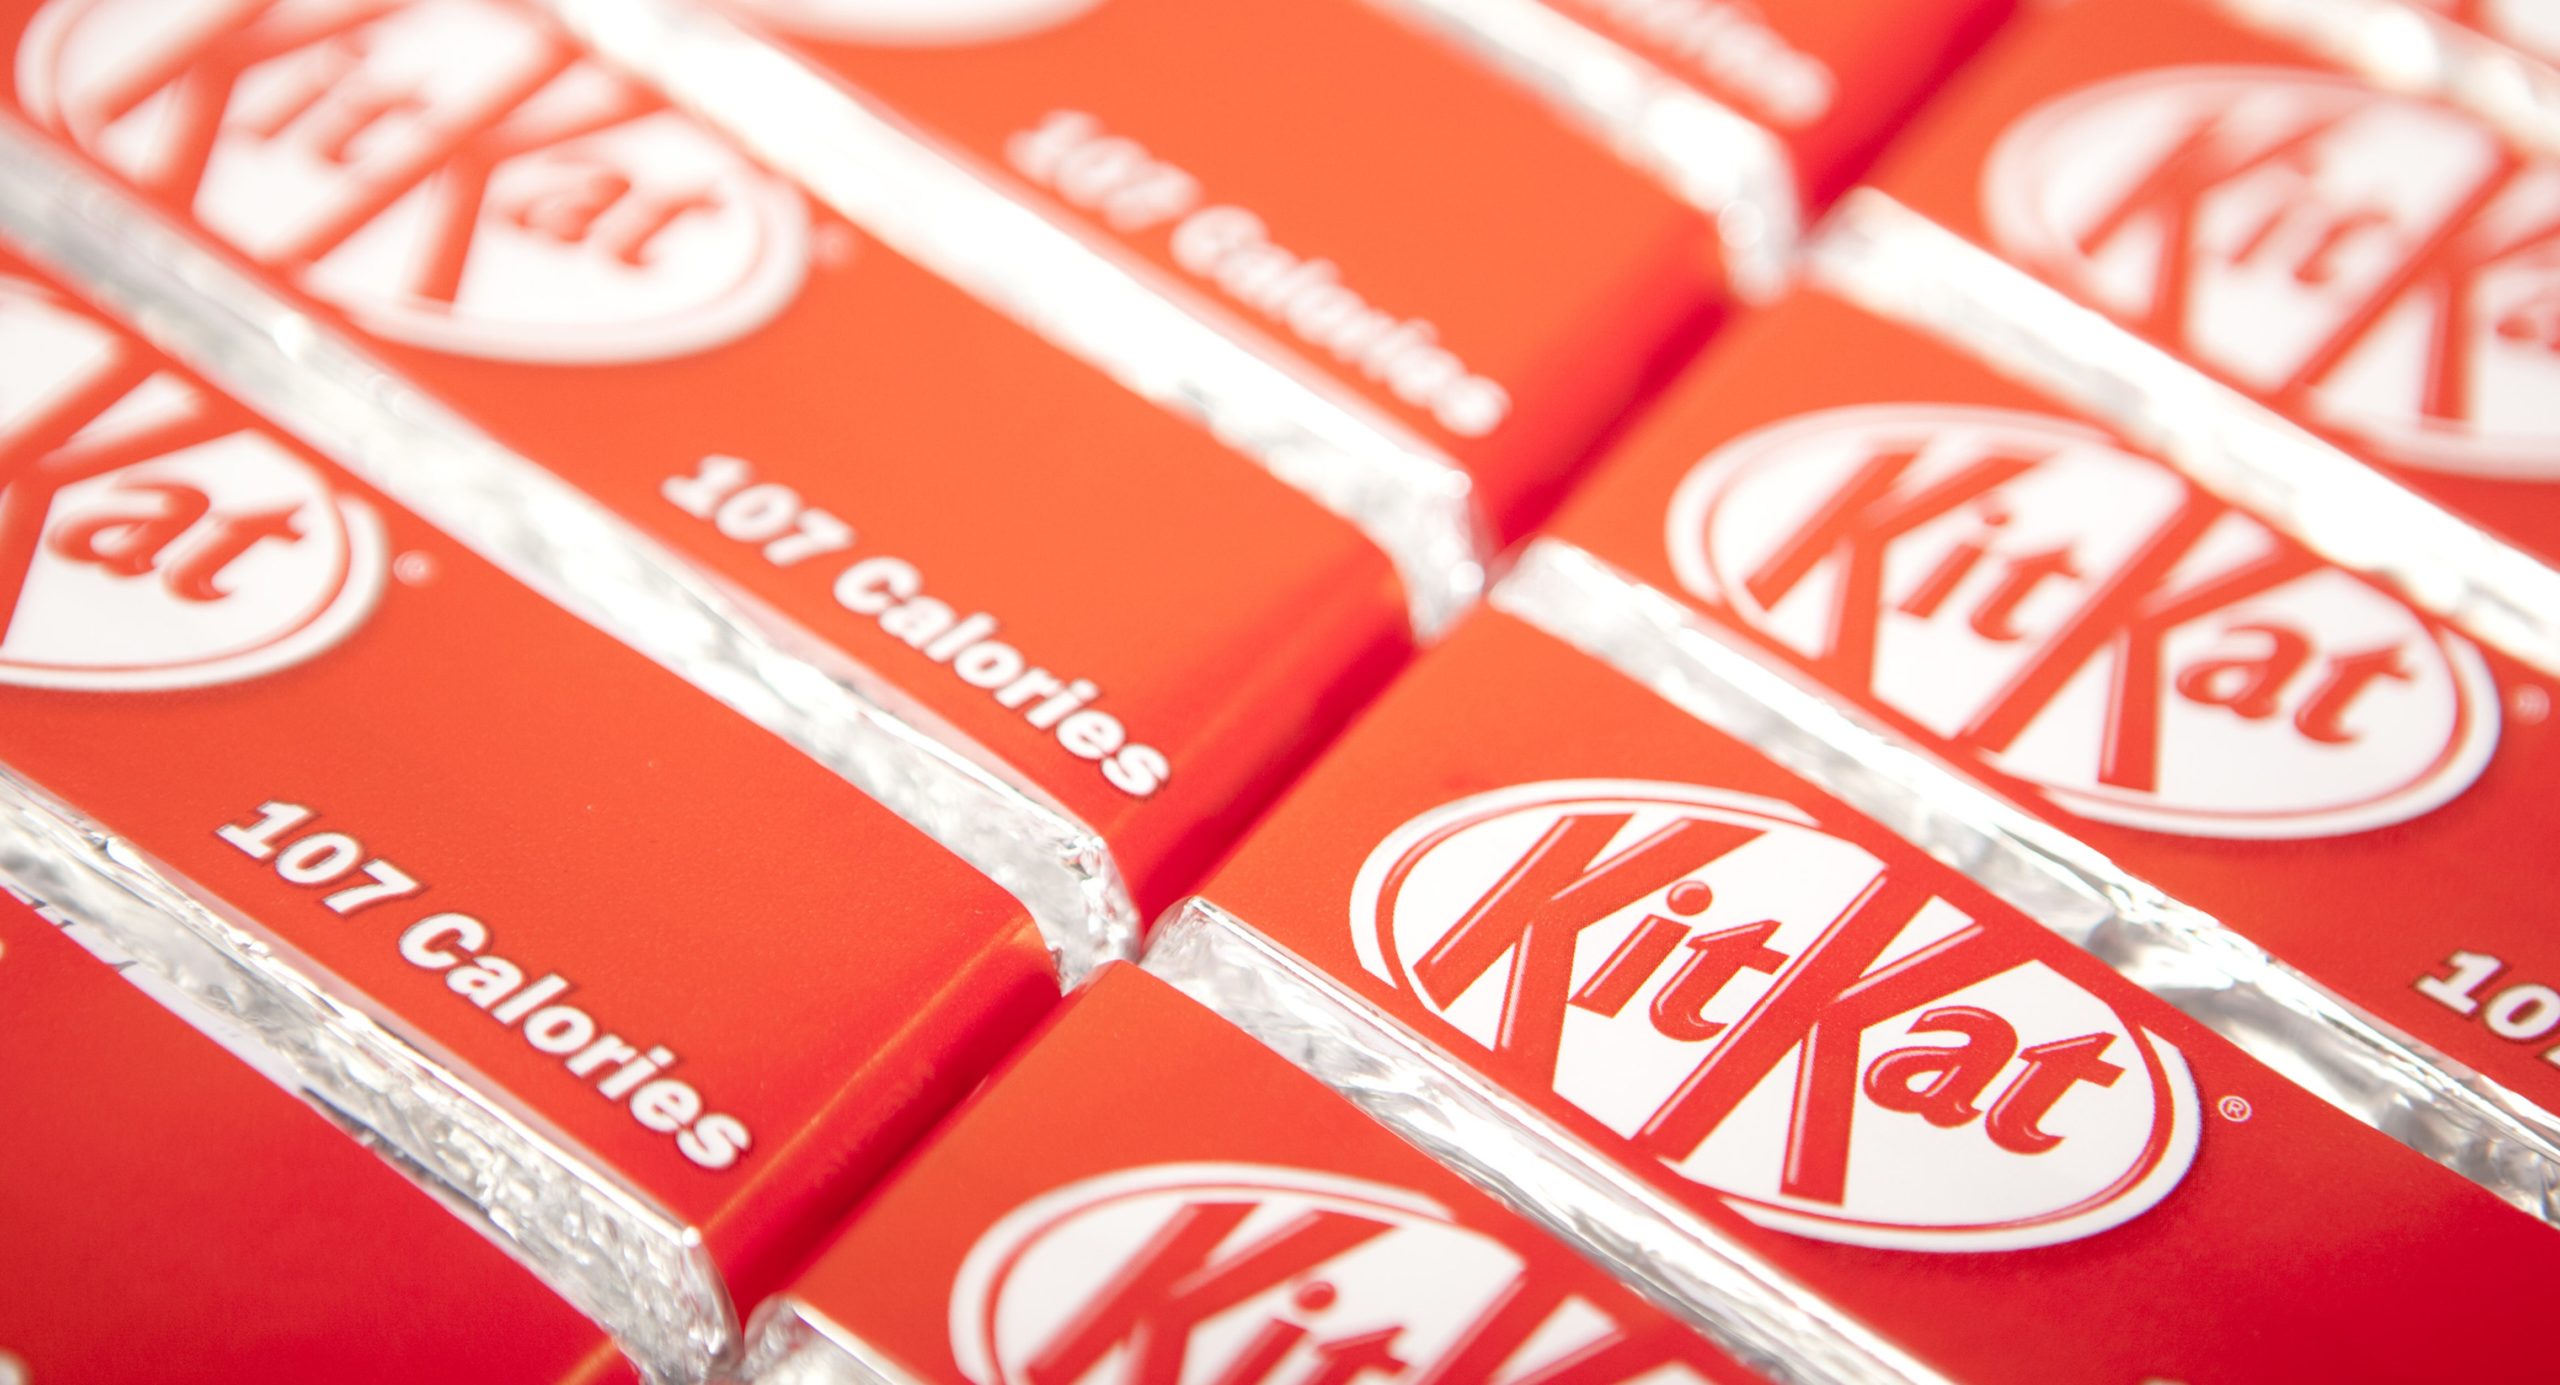 Feeling Down? Let This KitKat Story Cheer You Up